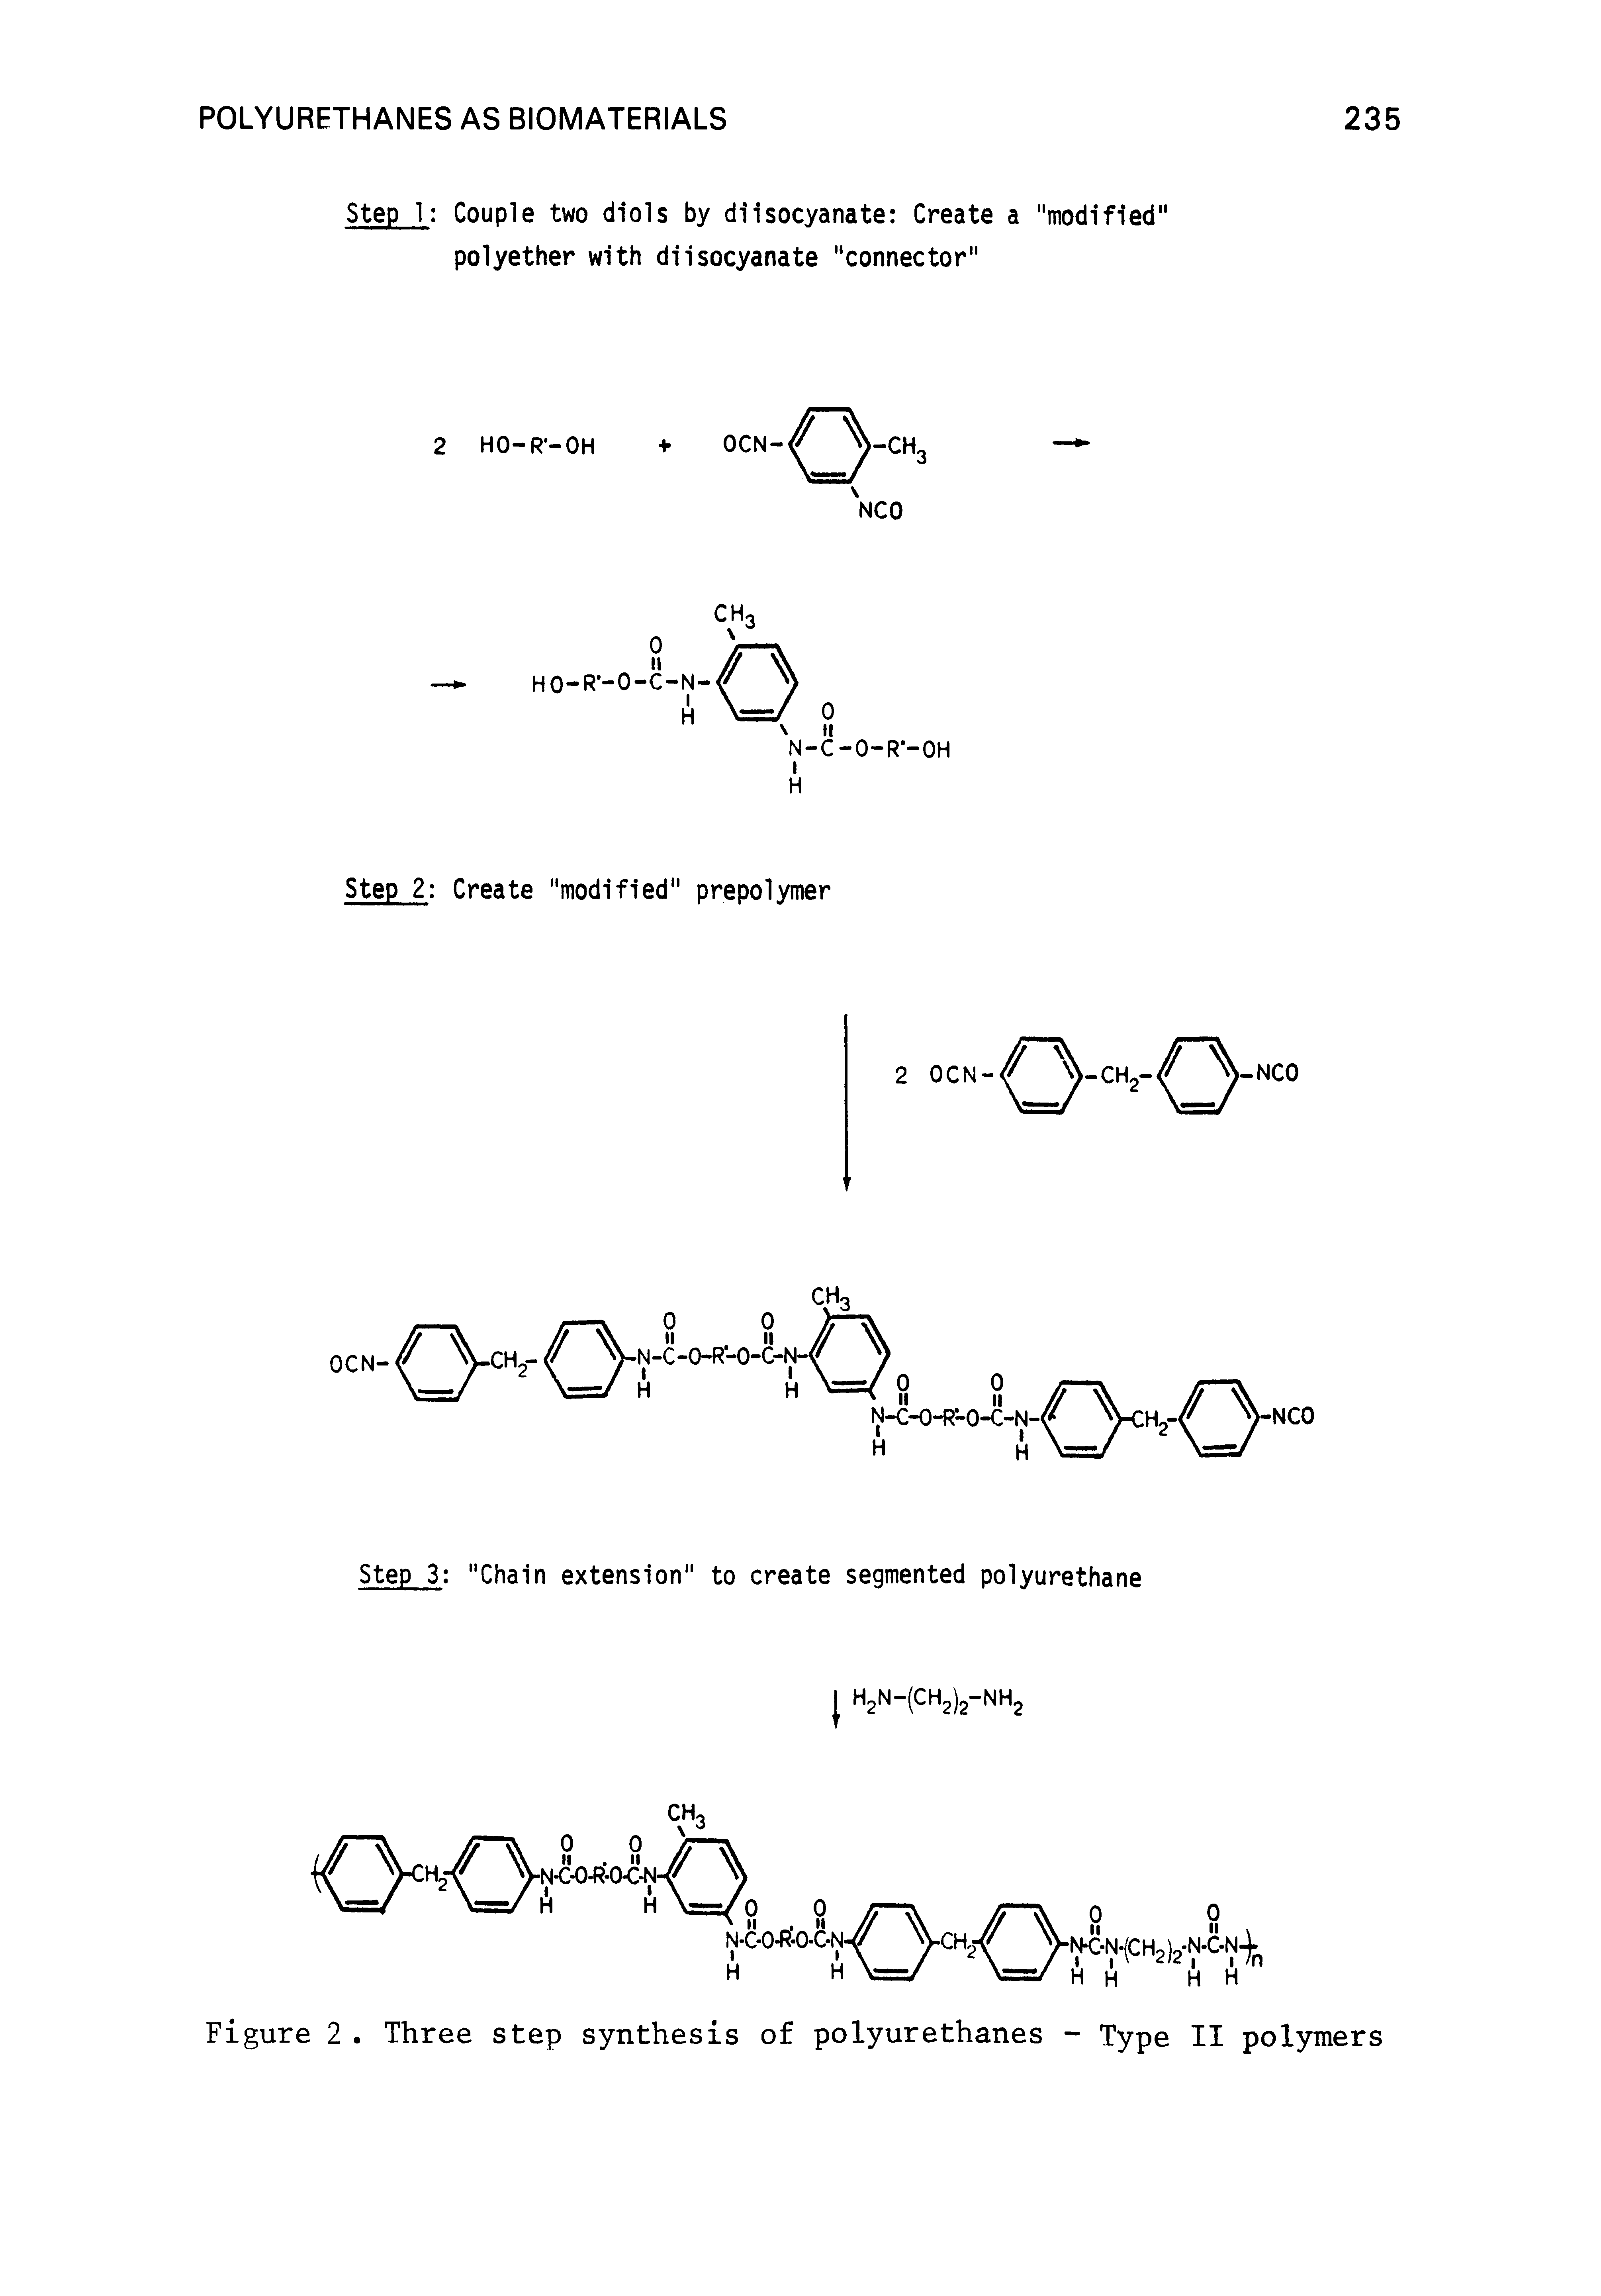 Figure 2. Three step synthesis of polyurethanes - Type II polymers...